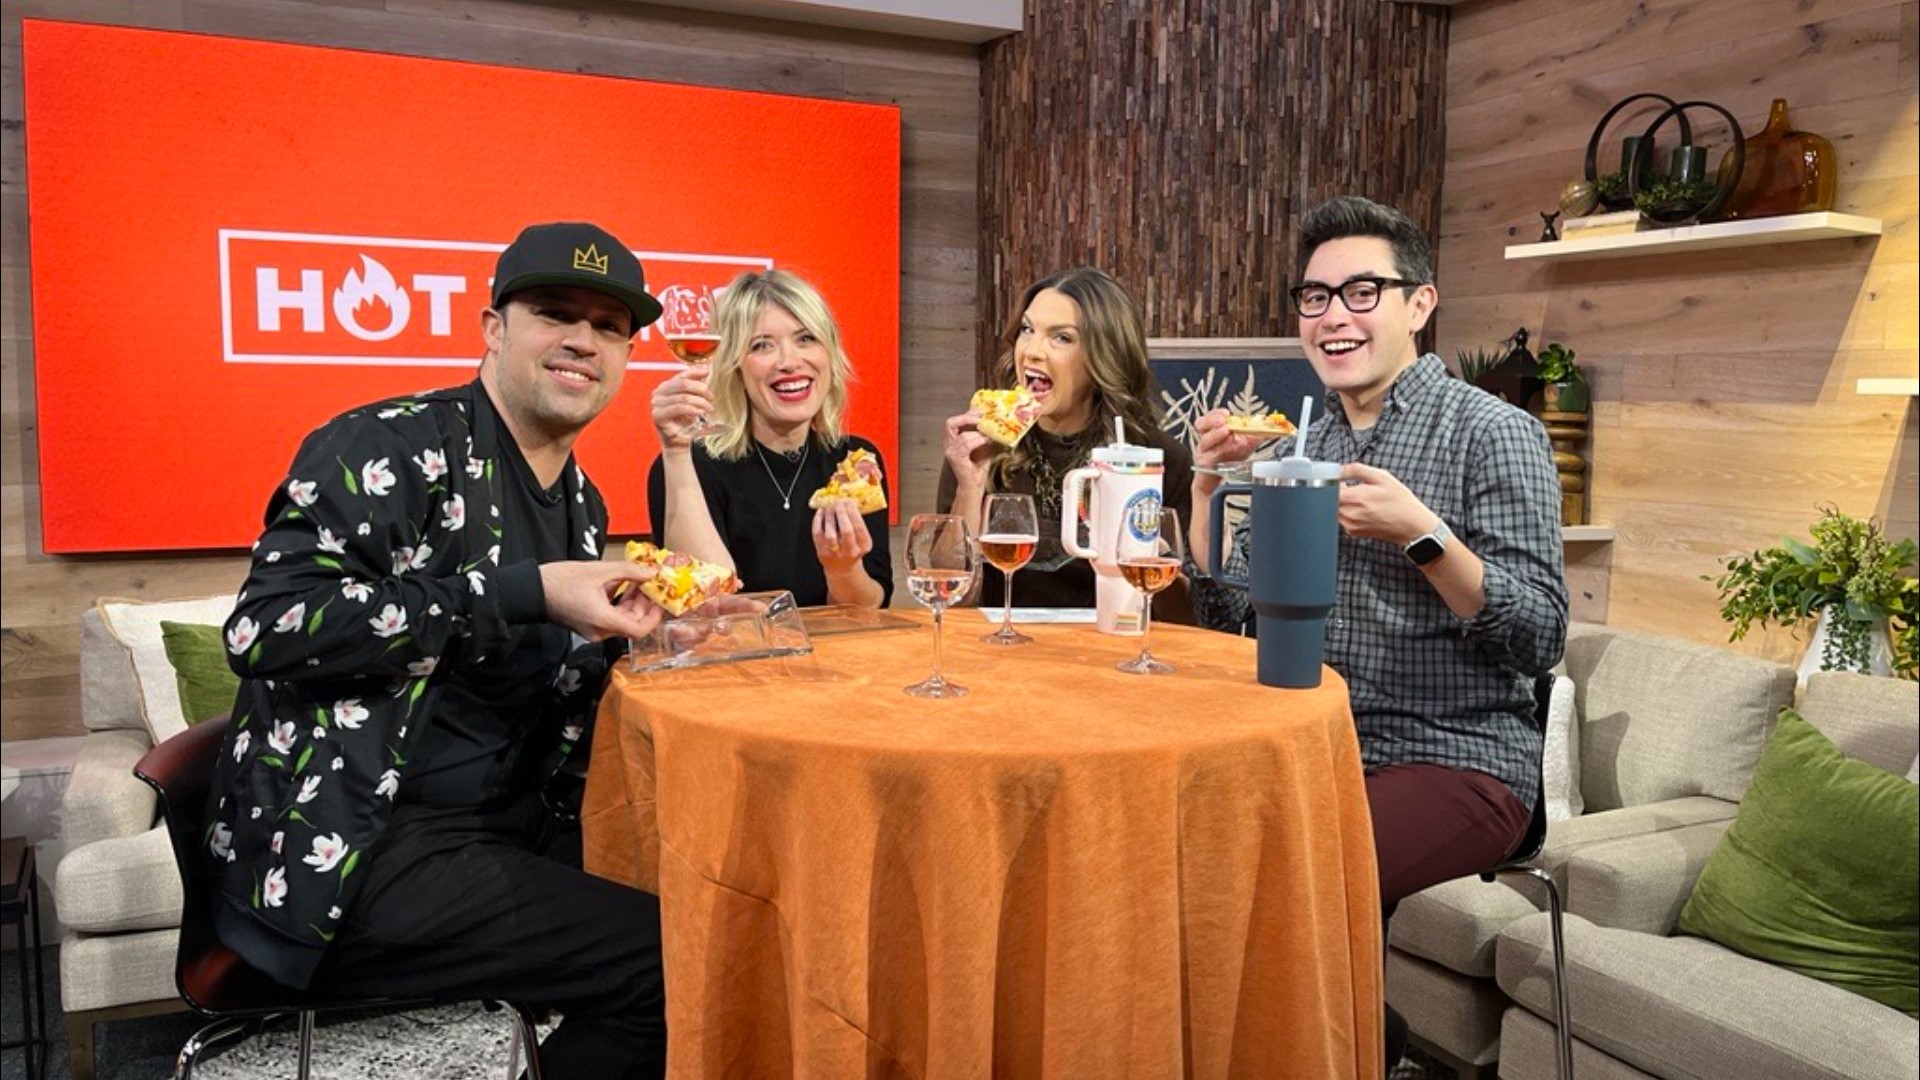 Amity is joined by Brooke Fox and Jose Bolanos from MOVIN 92.5 and Executive Producer Joseph Suttner to talk about feelings on flying, snow and new goldfish flavors.